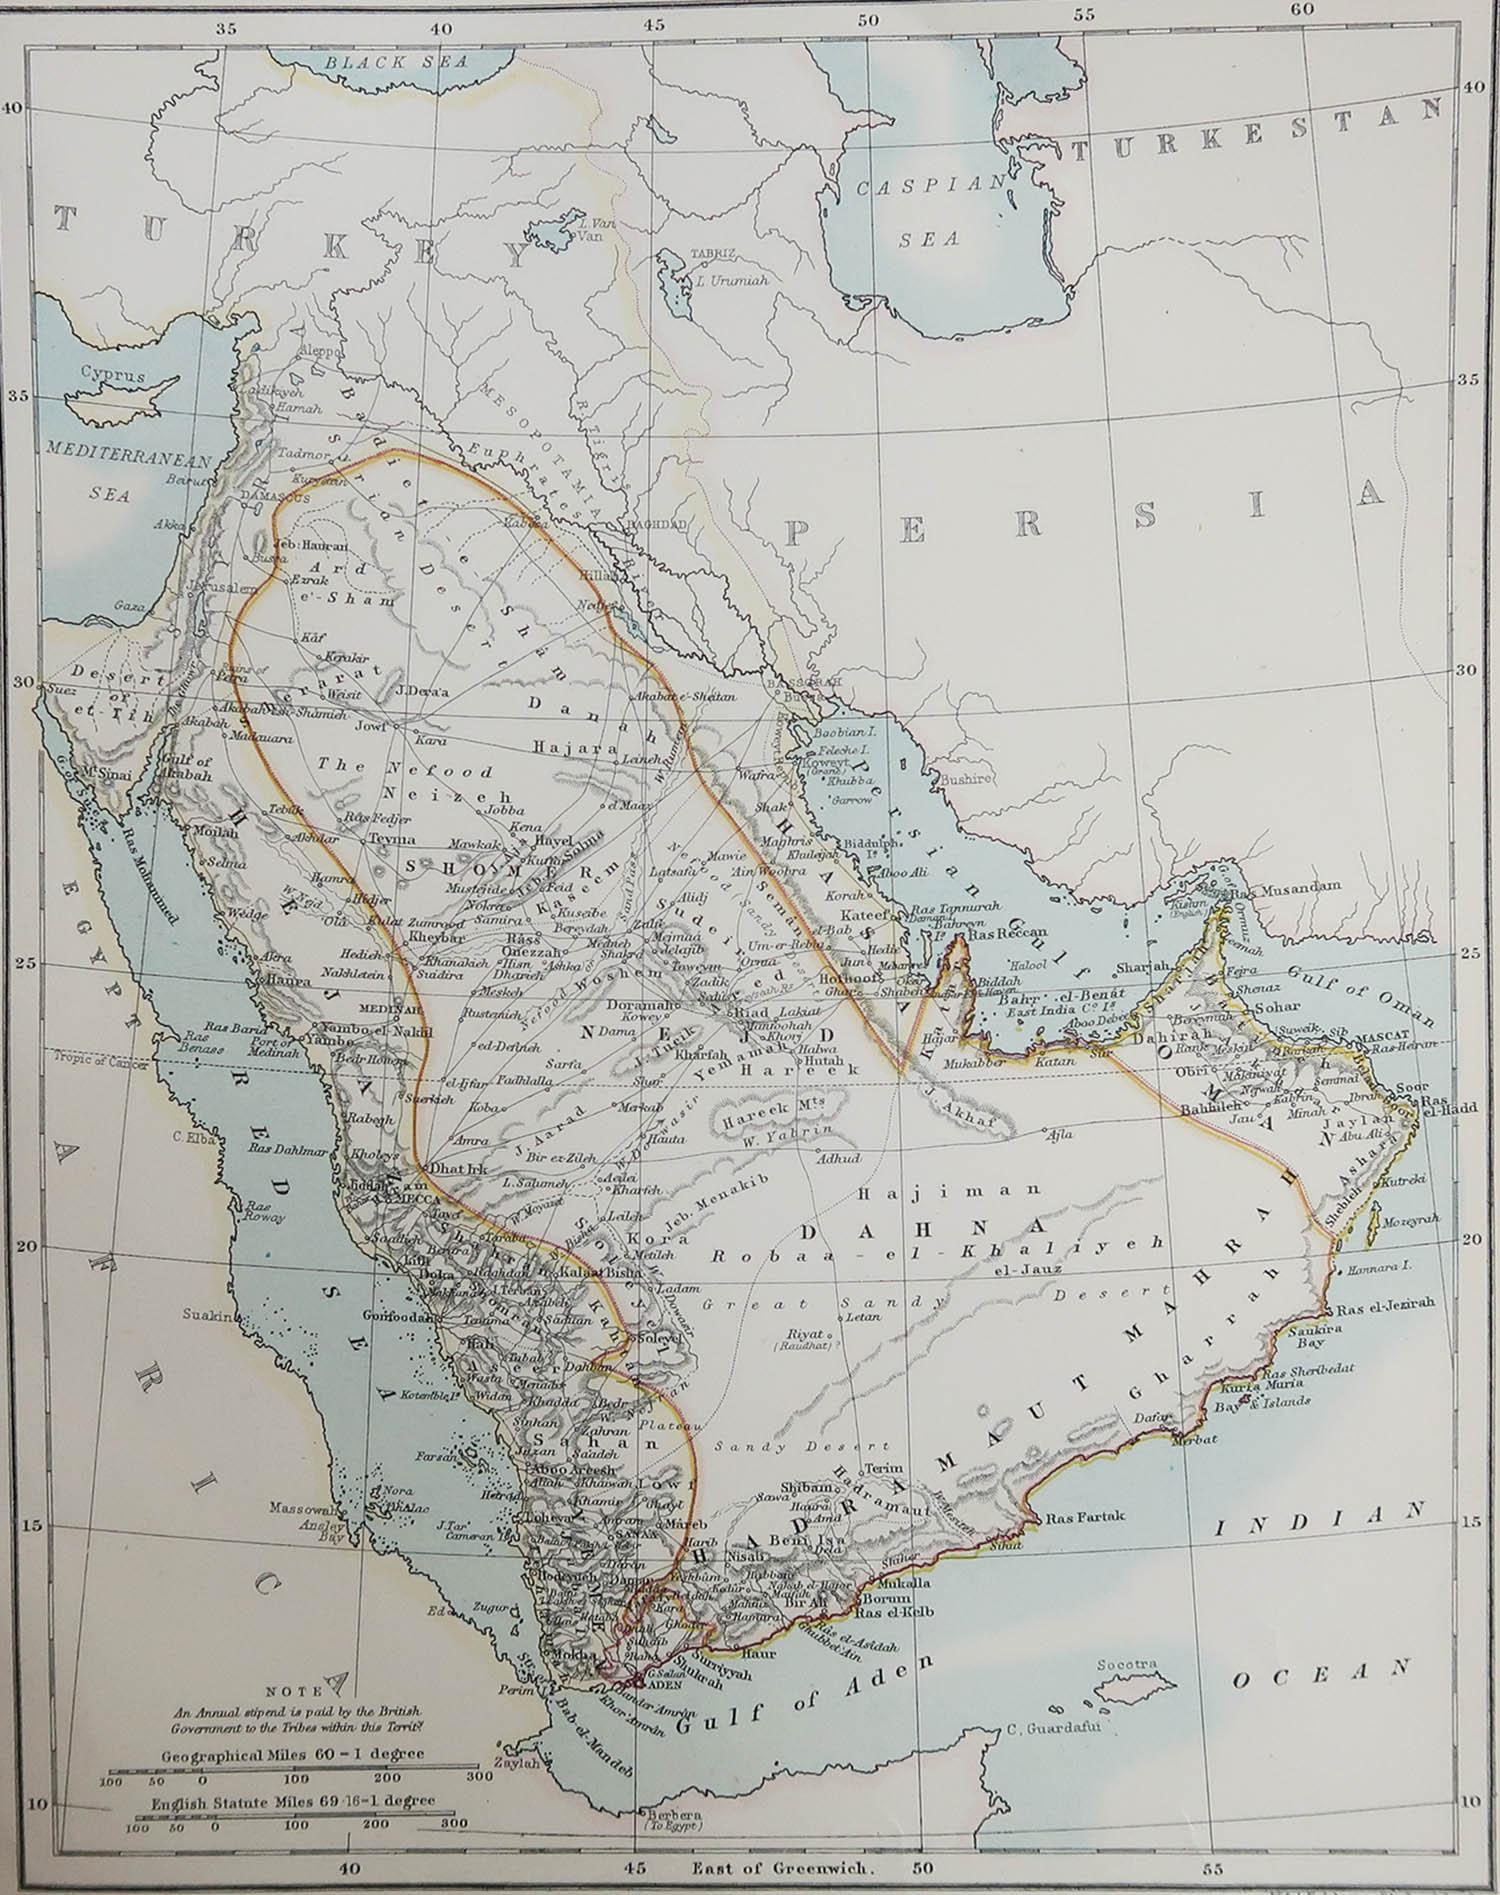 Great map of Saudi Arabia

Drawn and Engraved by W. & A.K. Johnston

Published By A & C Black, Edinburgh.

Original colour

Unframed.








